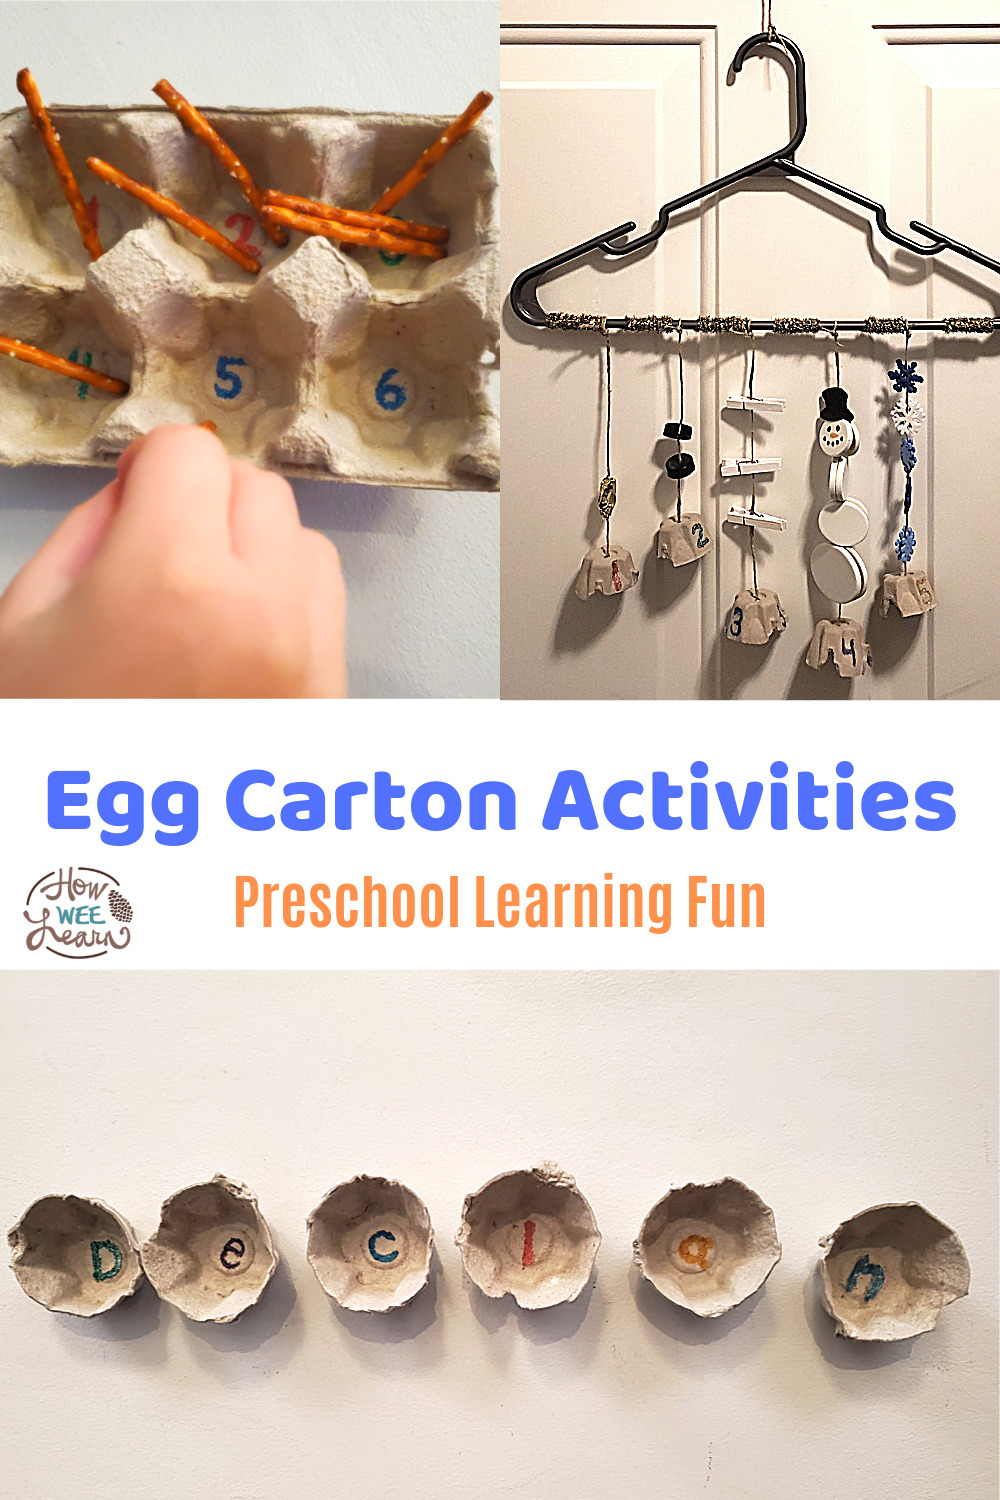 We had so much fun with these preschool activities using egg cartons. Lots of fun and easy learning using materials found at home.